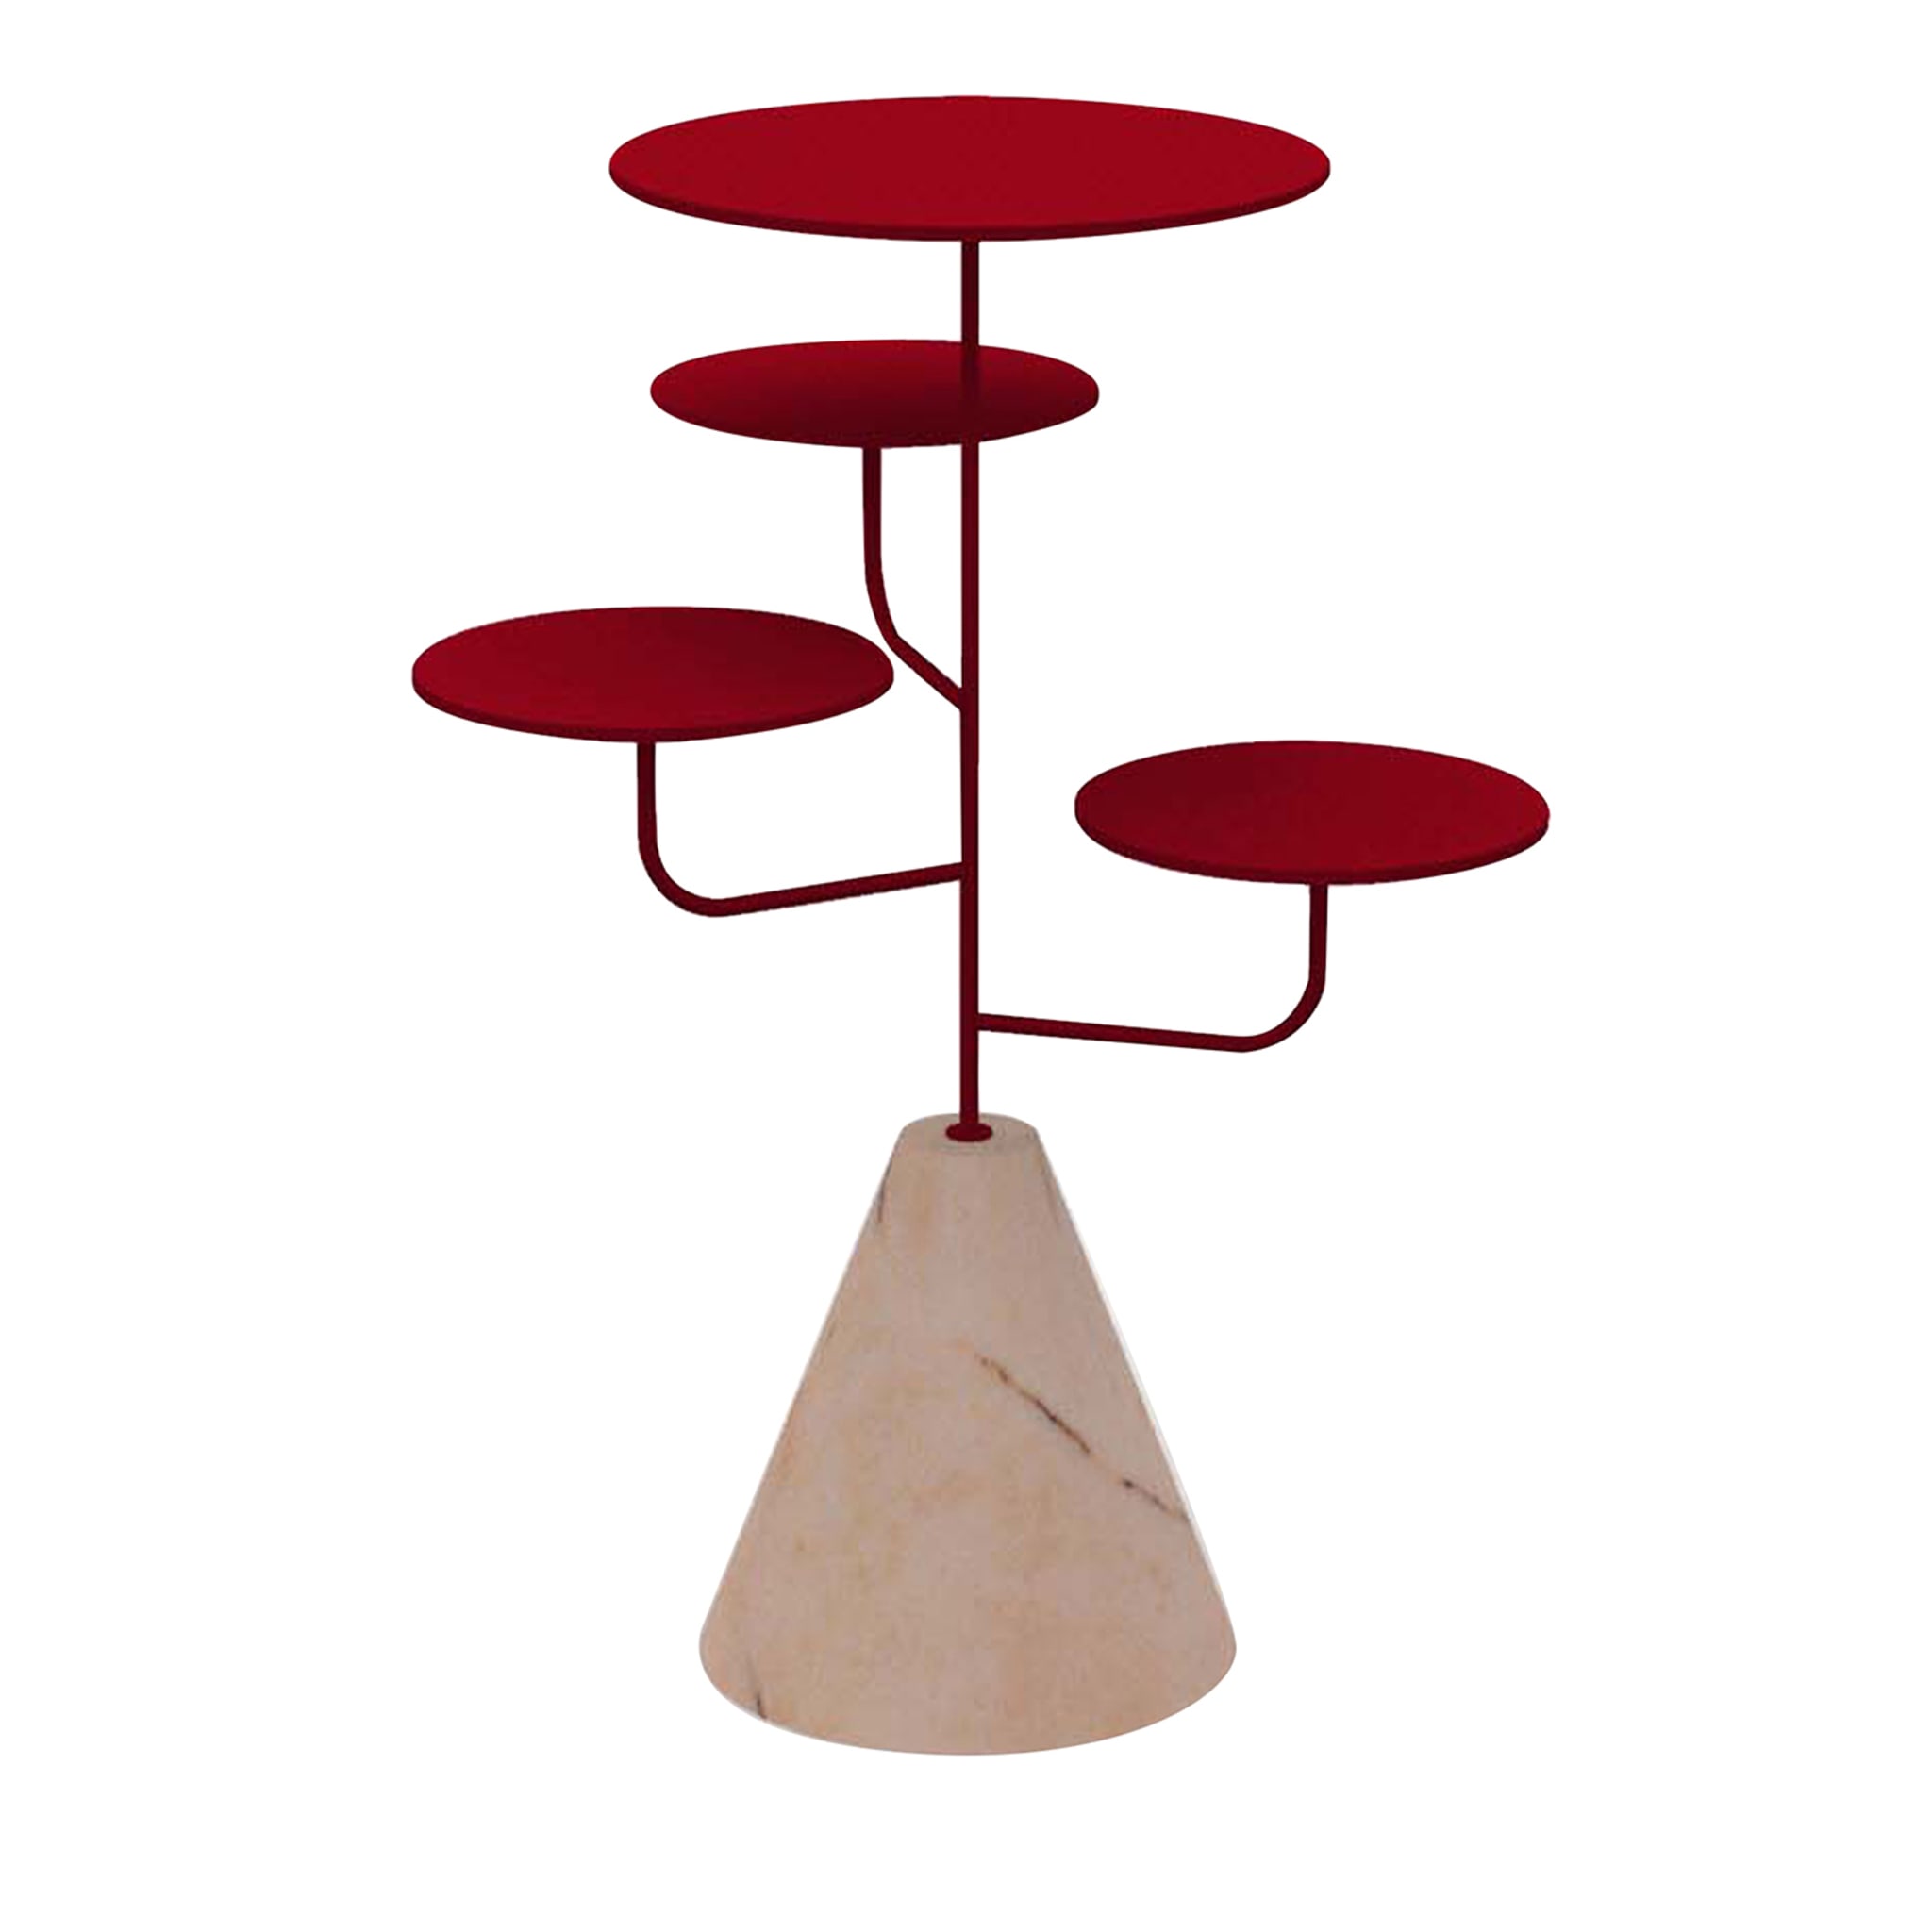 Condiviso 4-Tier Ruby Red/Pink Portogallo Serving Stand - Main view